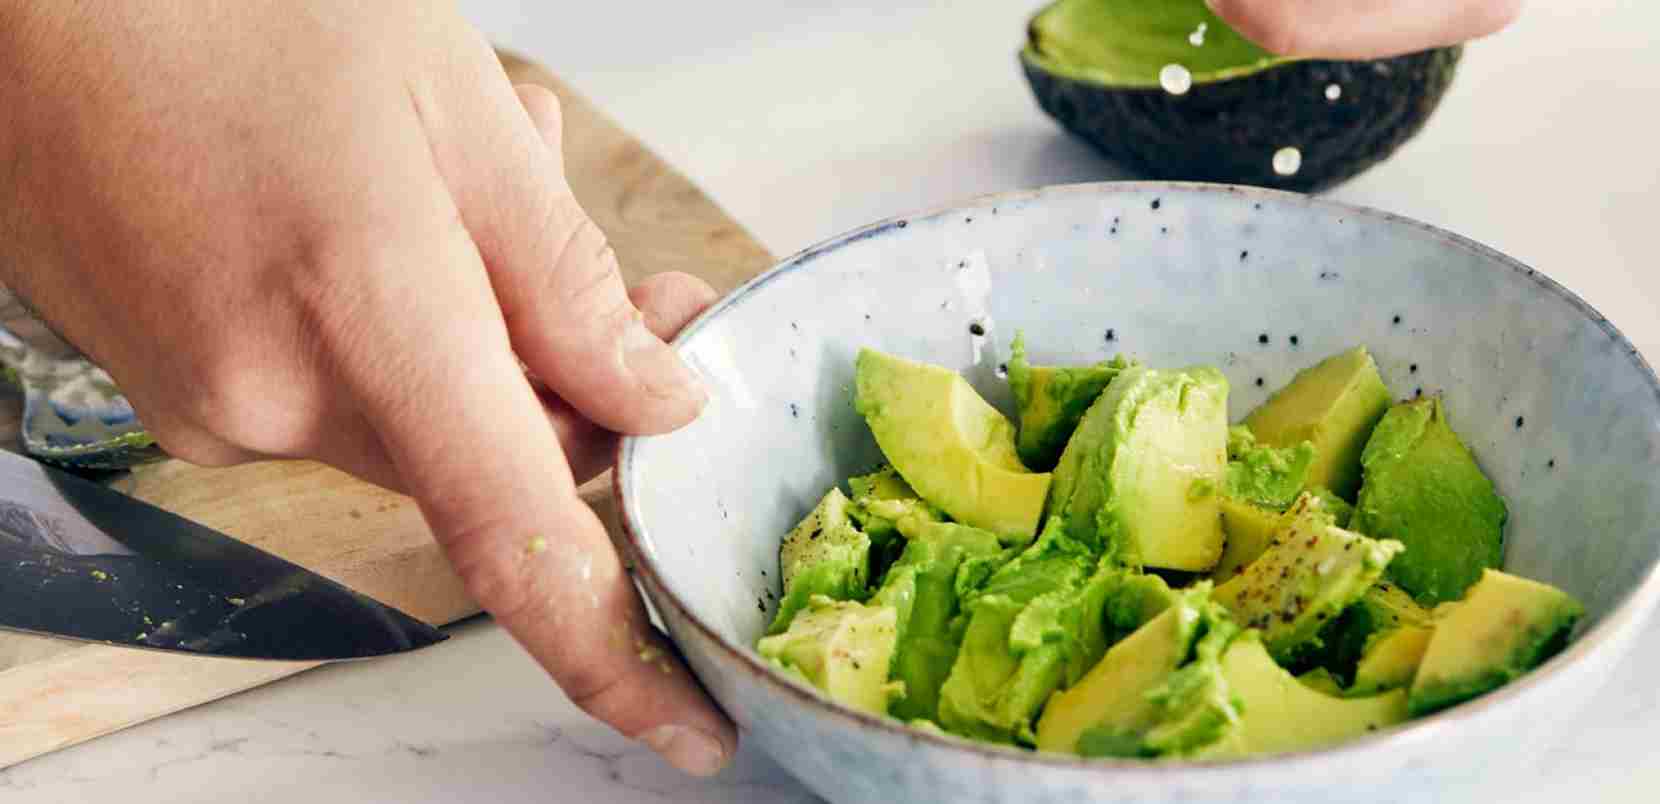 Hand holding a bowl of avocadoes